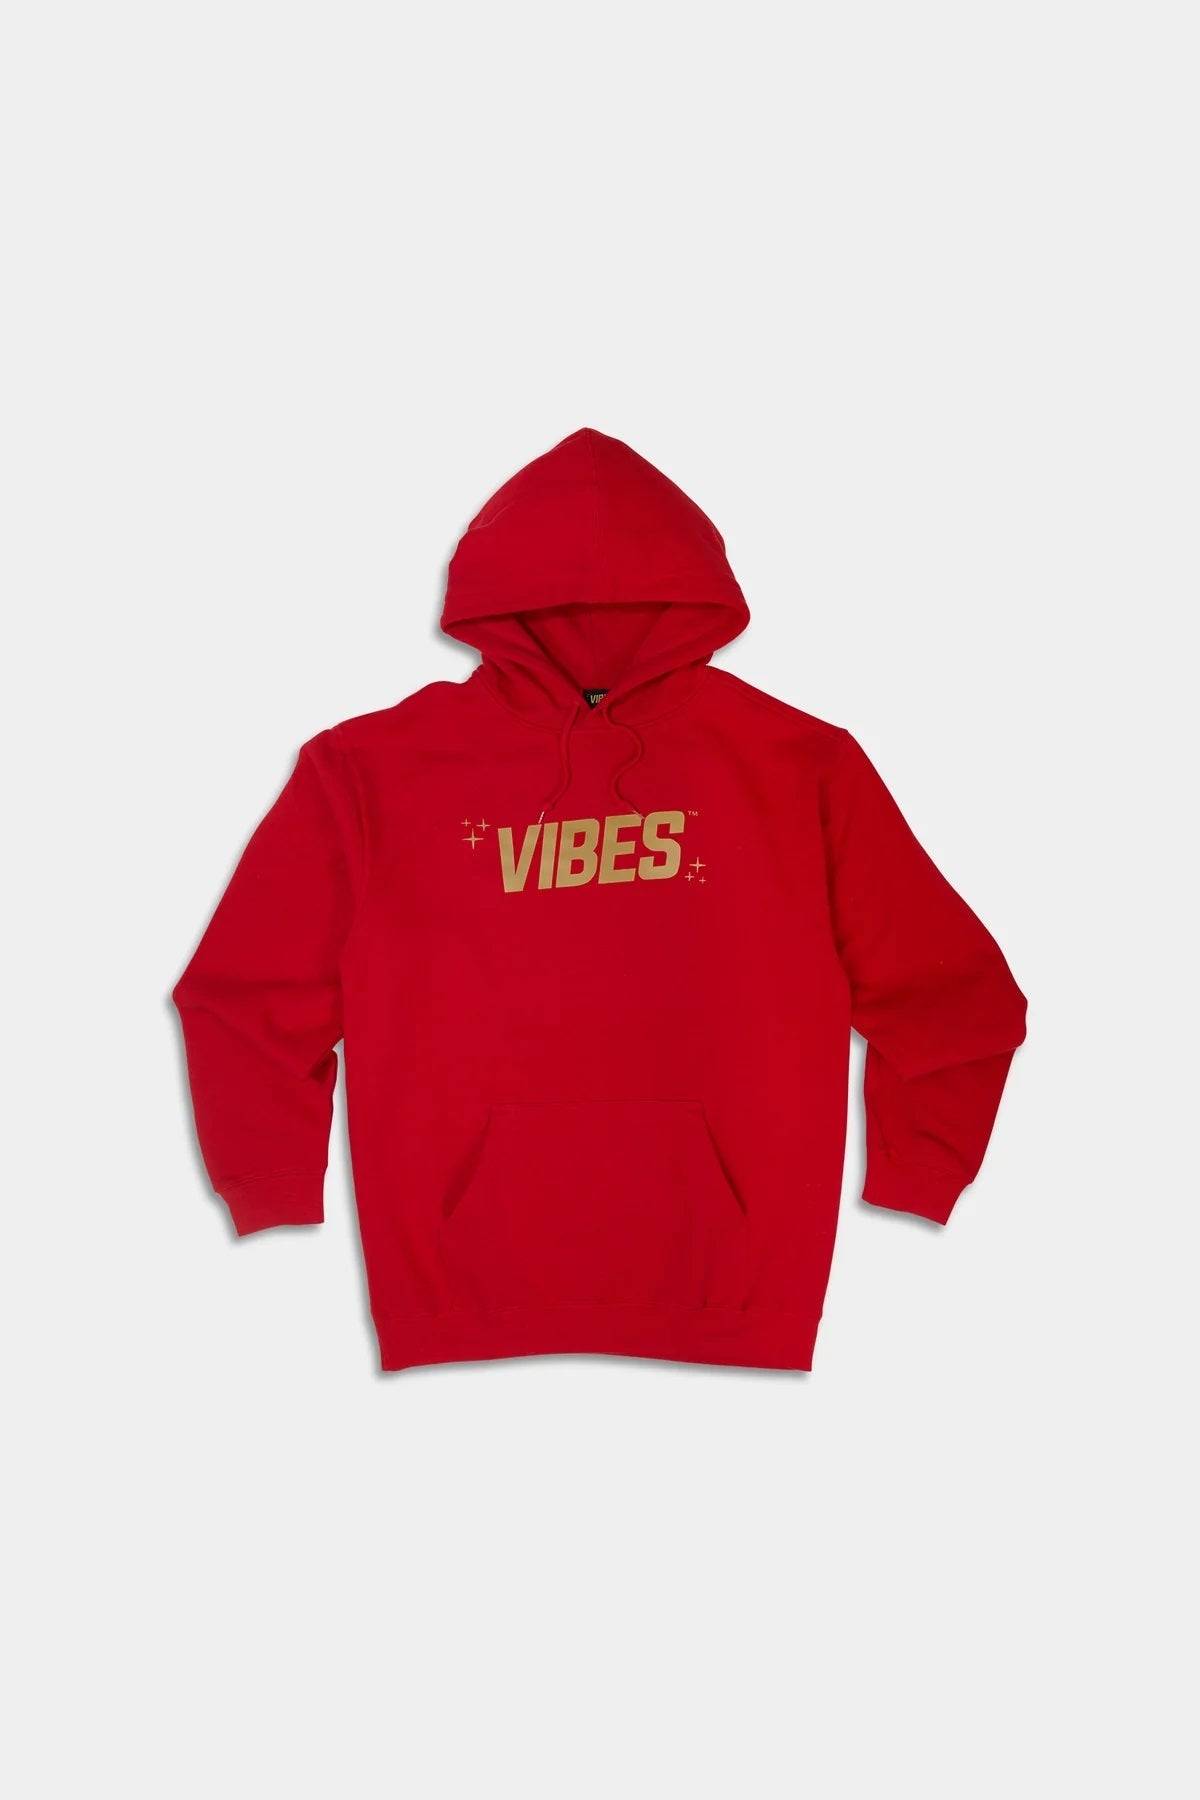 VIBES Red With Gold Logo Hoodie Large